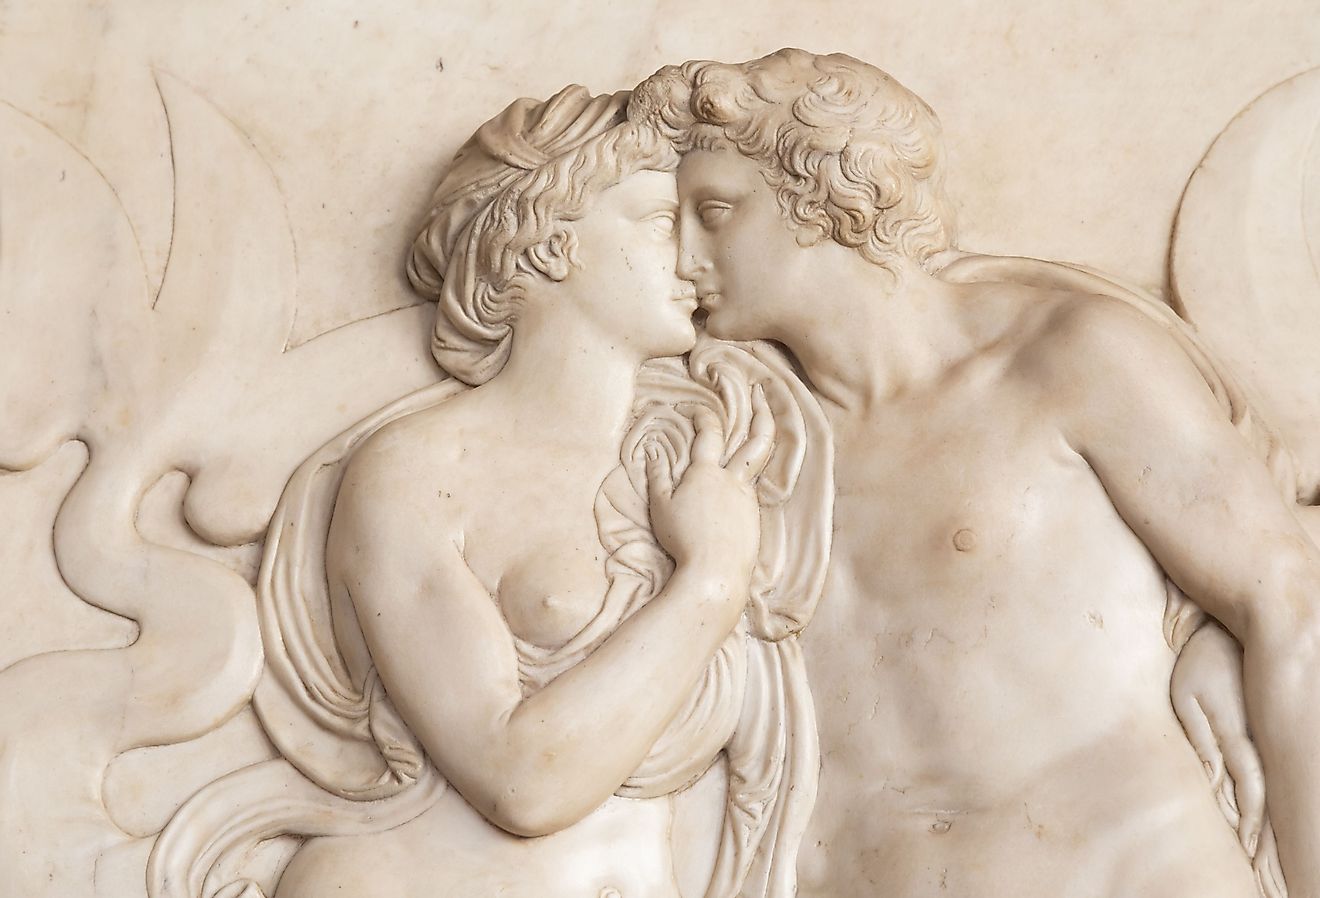 Ancient sculpture with kissing couple. Image credit Paolo Gallo via Shutterstock